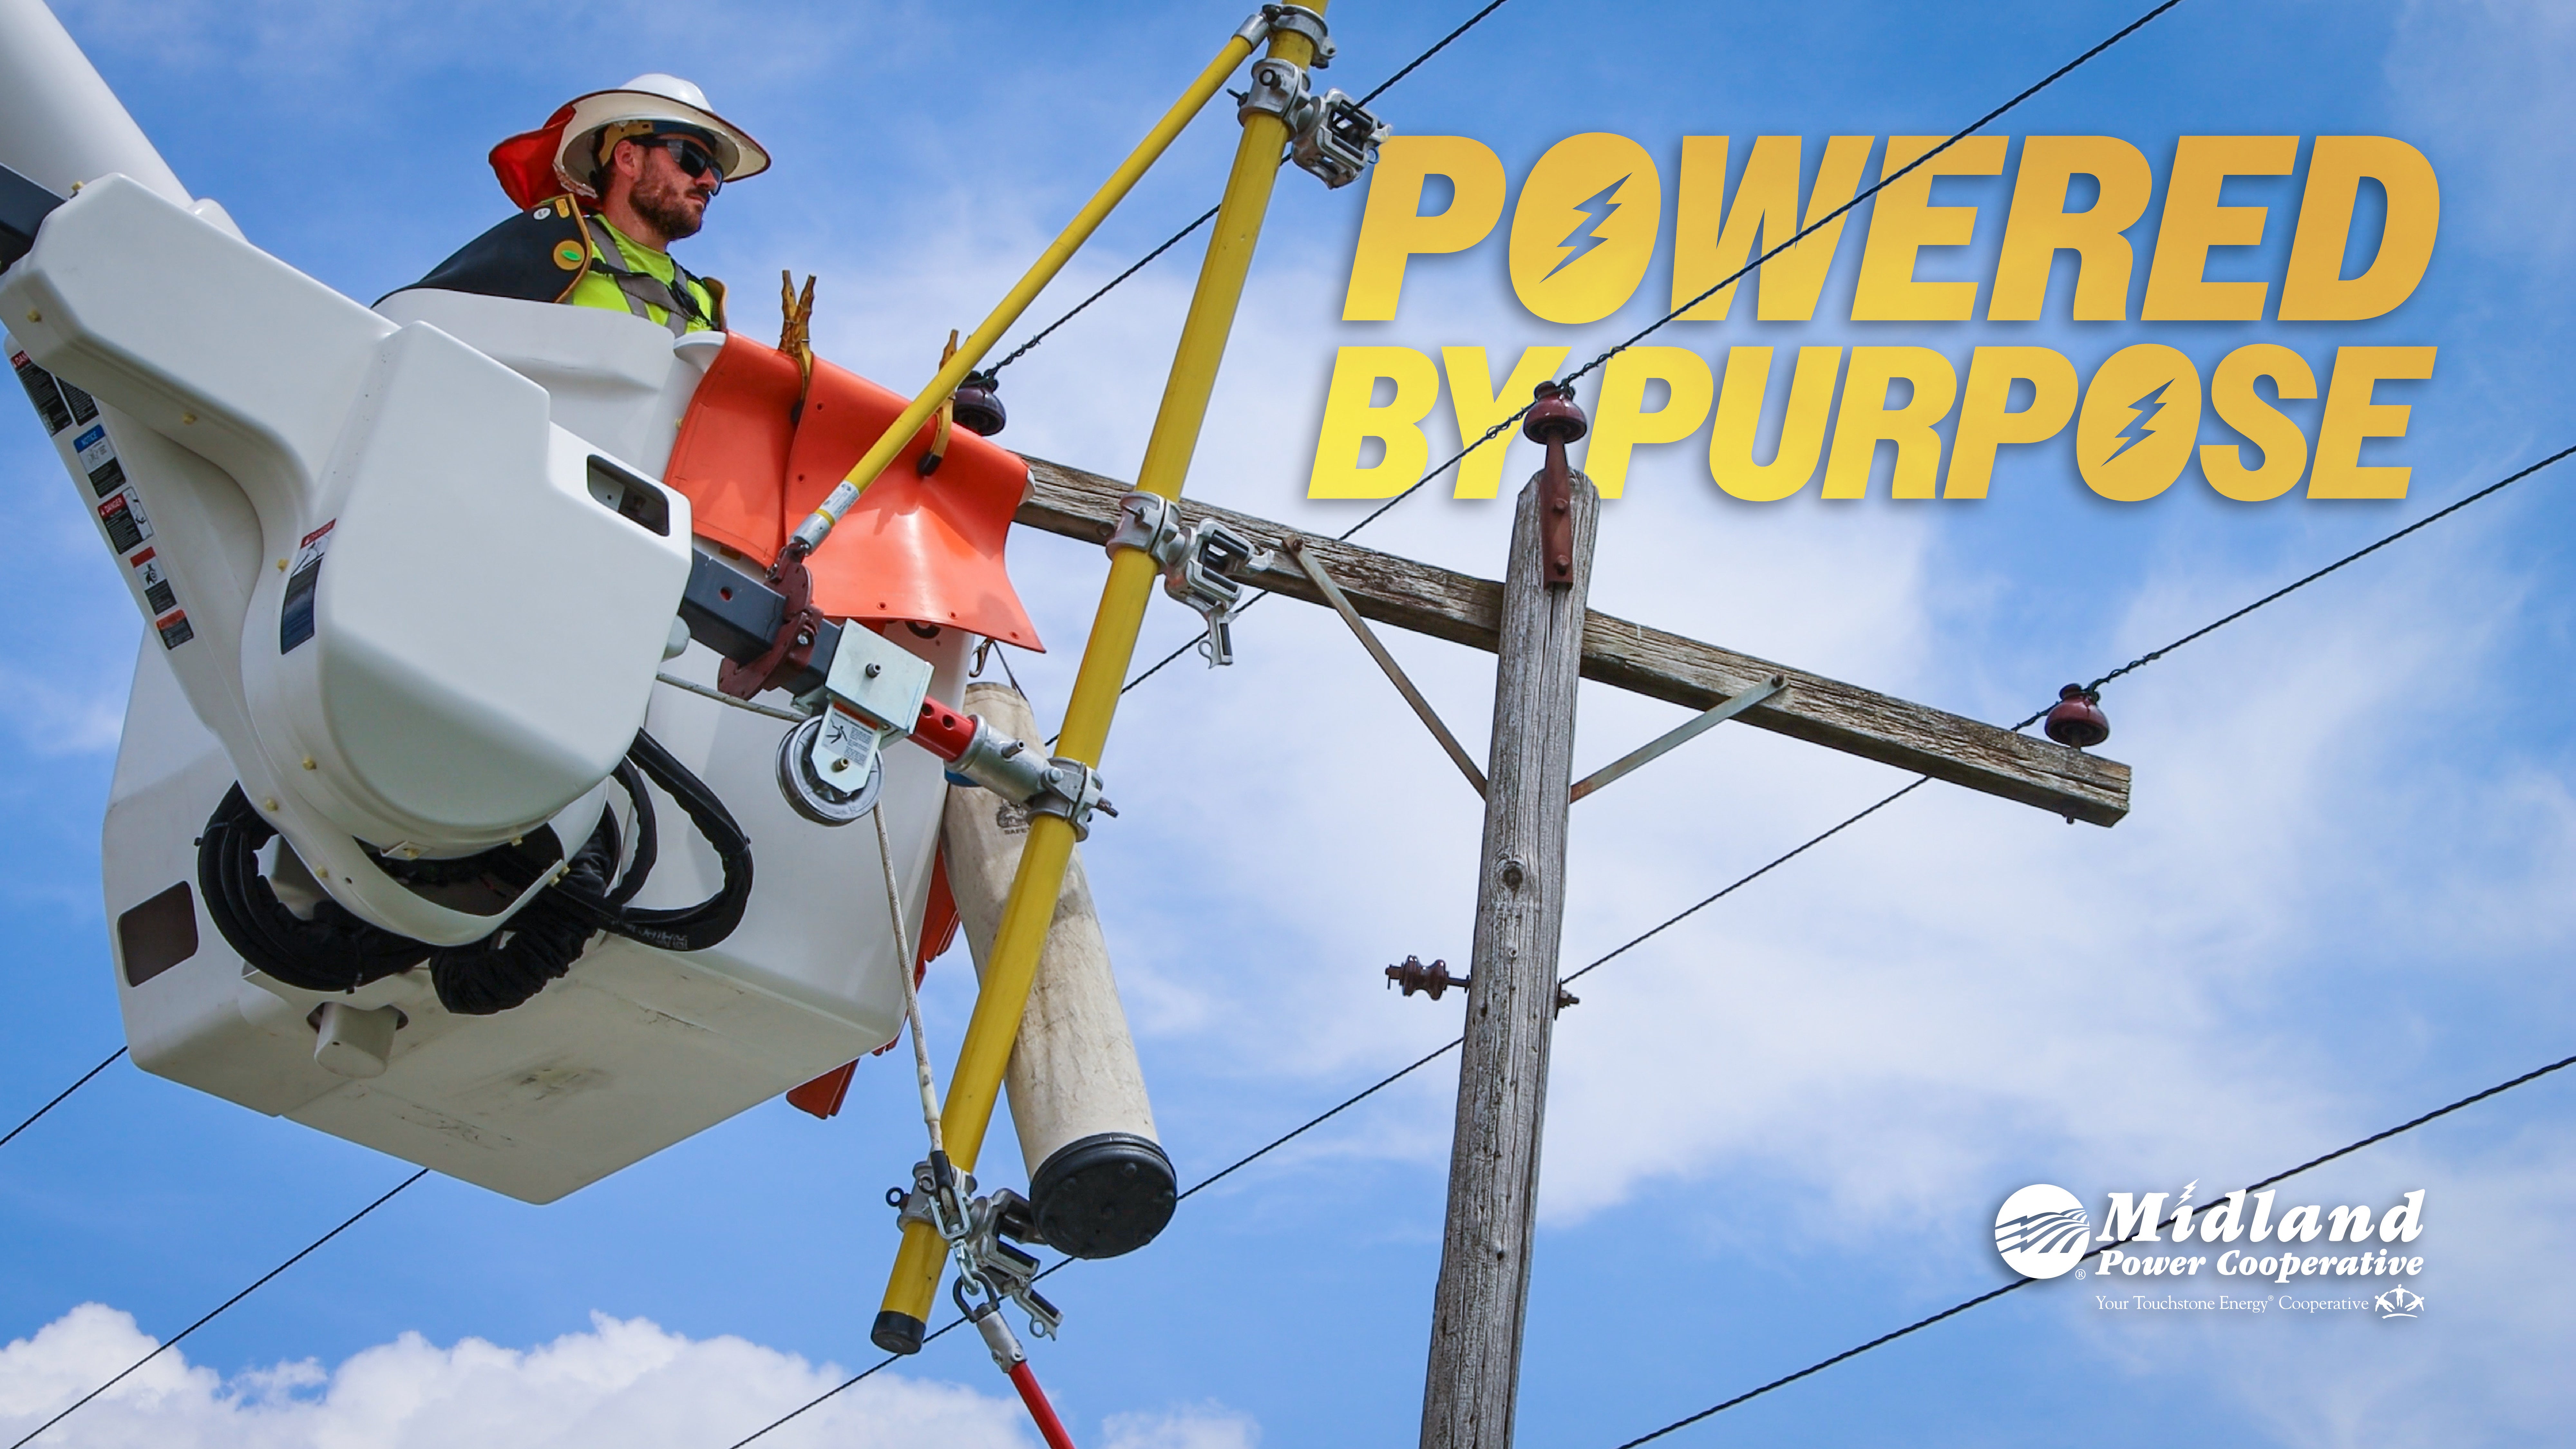 Midland Power is Powered by Purpose